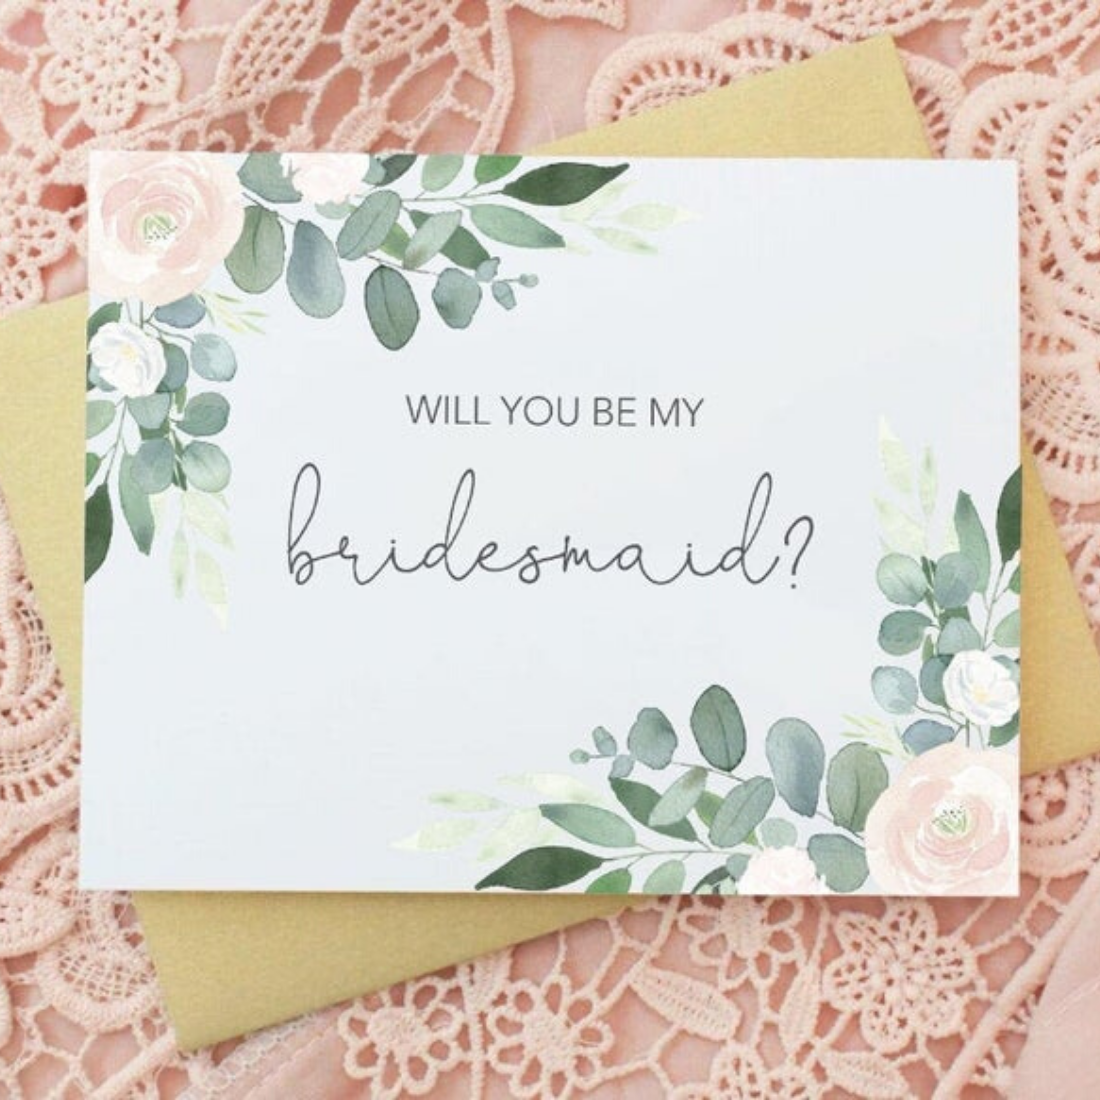 Will you be my Bridesmaid in Floral Wedding Party Card With Will You Be My Bridesmaid Card Template